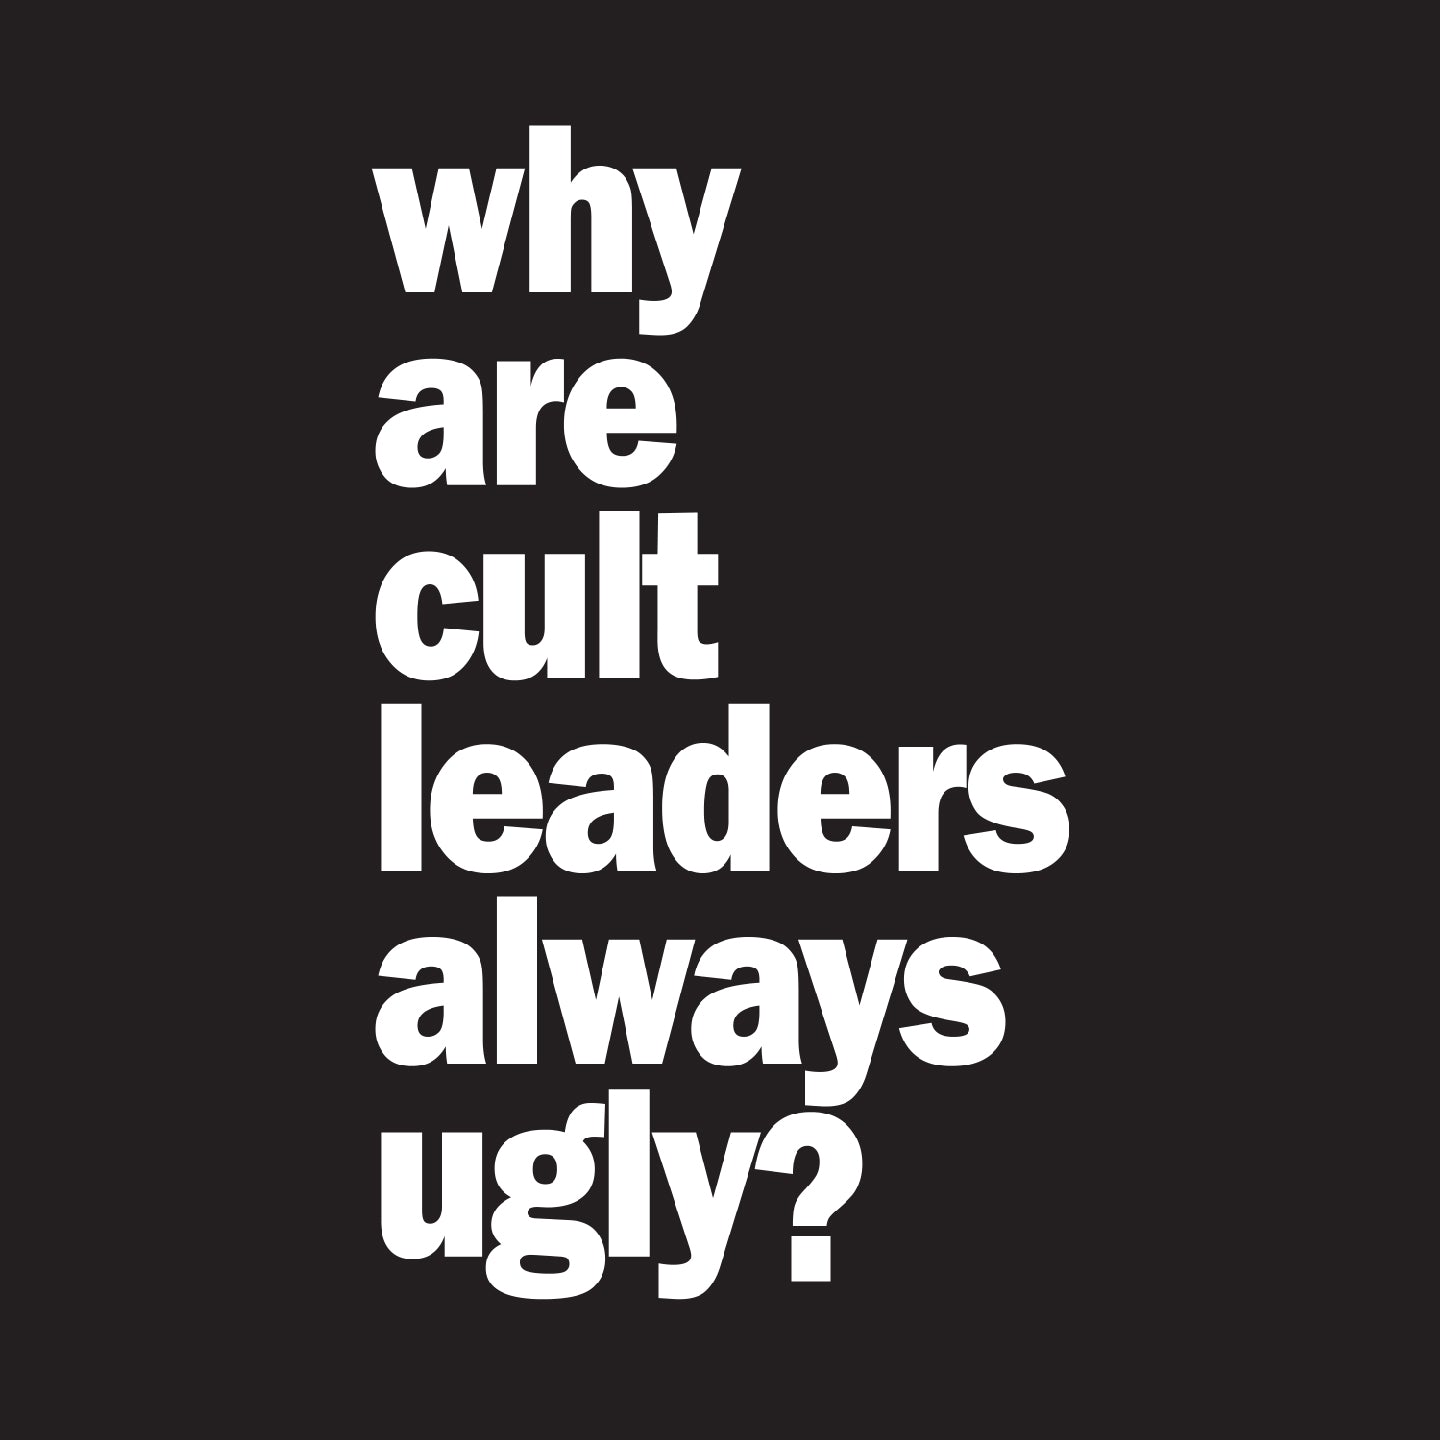 Why are cult leaders always ugly?